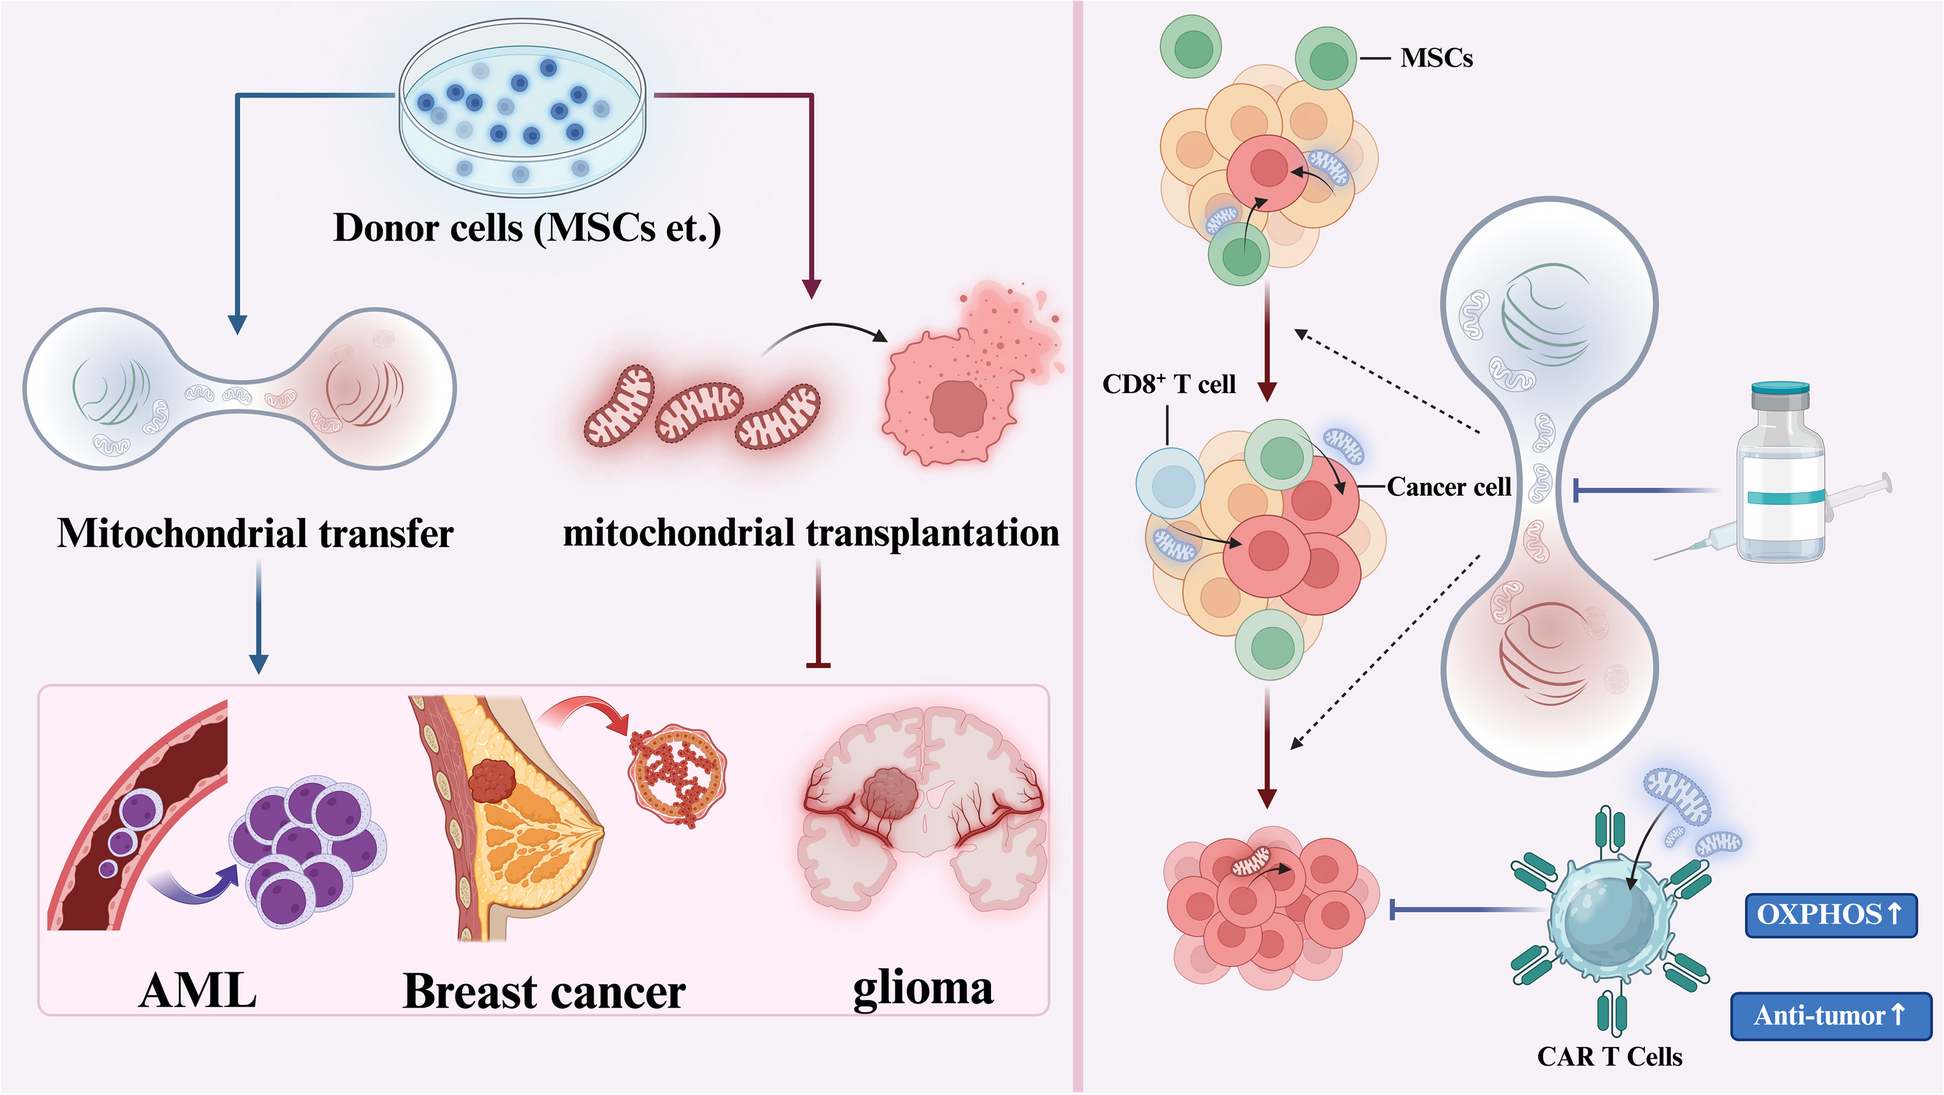 Mitochondrial transfer in tunneling nanotubes—a new target for cancer therapy